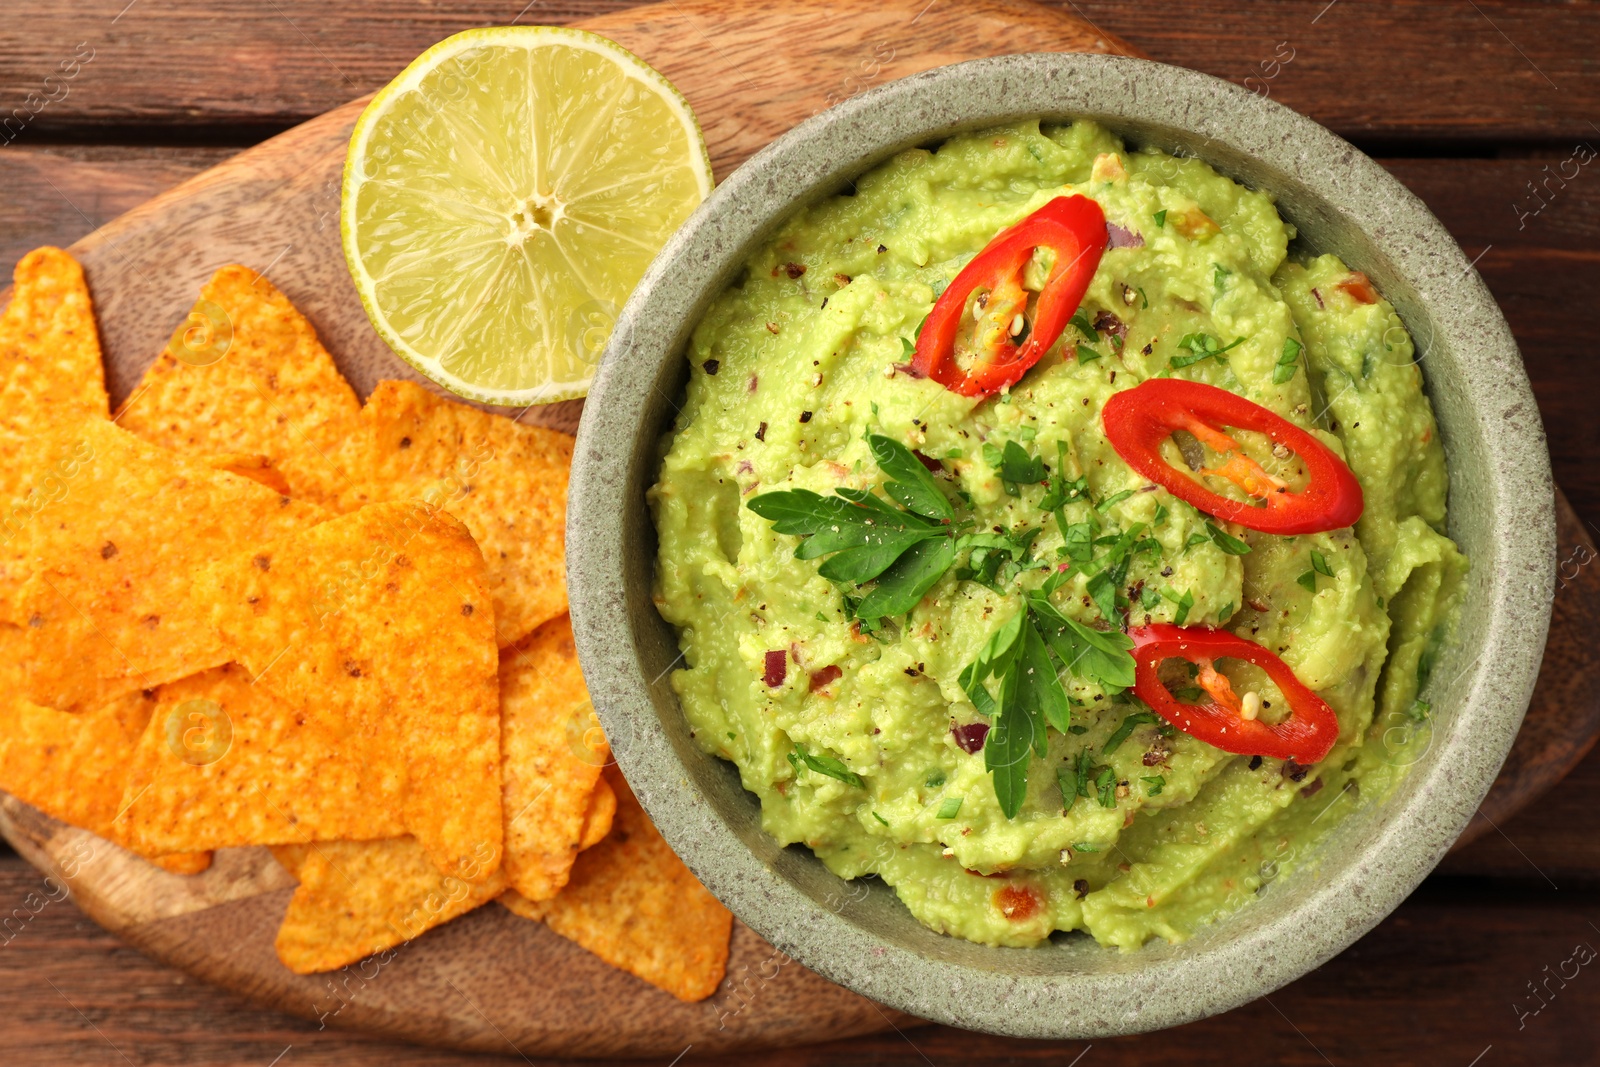 Photo of Bowl of delicious guacamole, lime and nachos chips on wooden table, top view